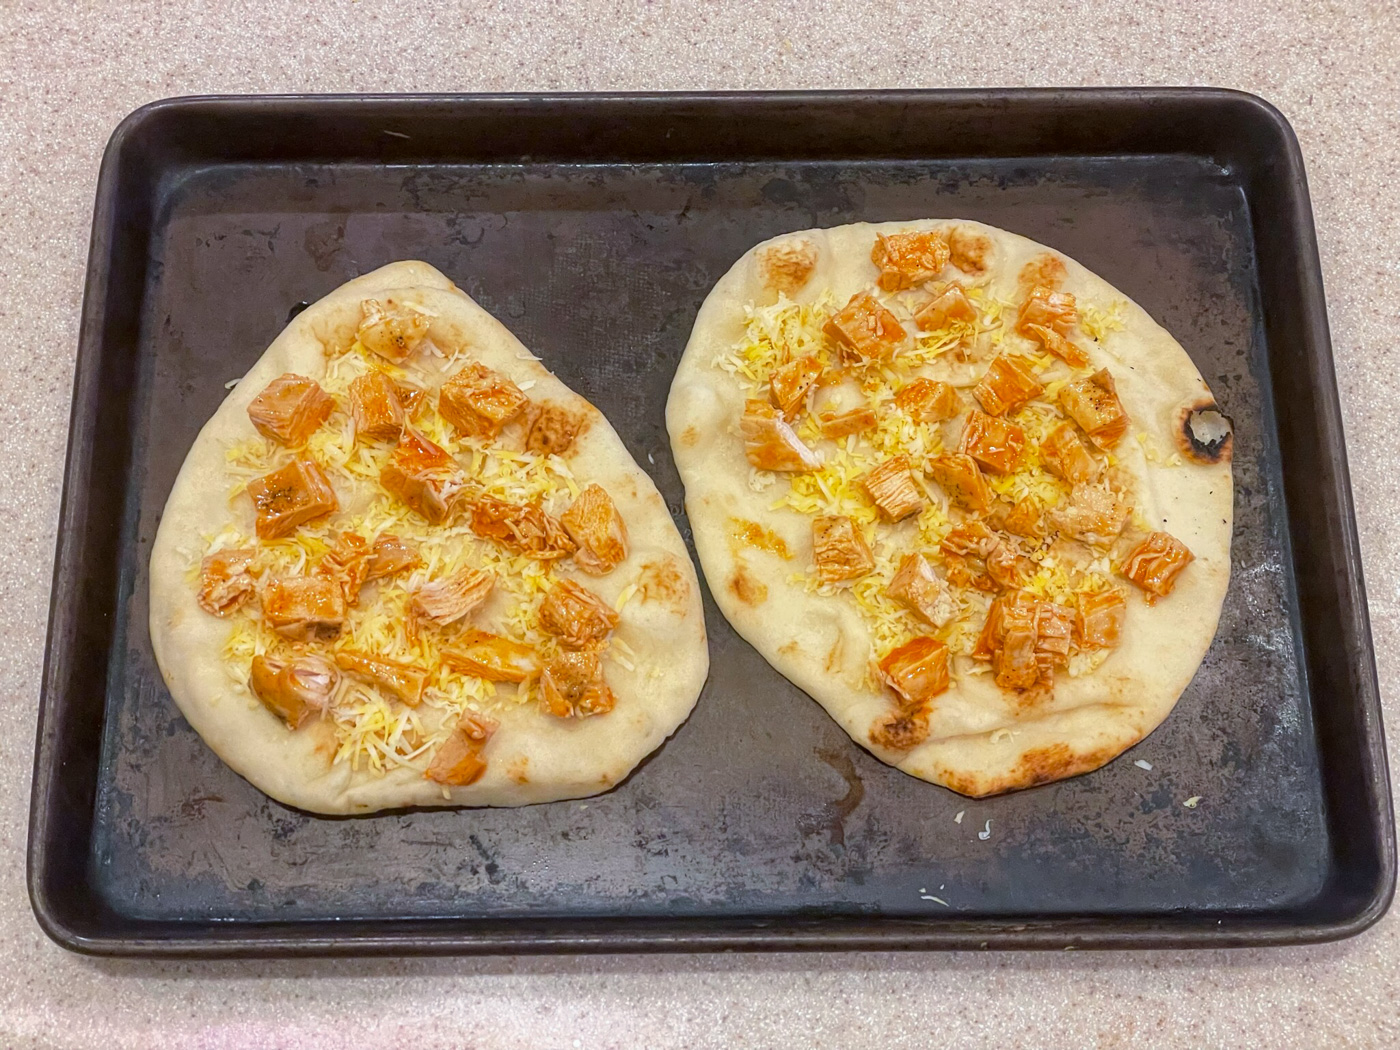 Buffalo-coated chicken placed on top of flatbread and cheese, just before baking